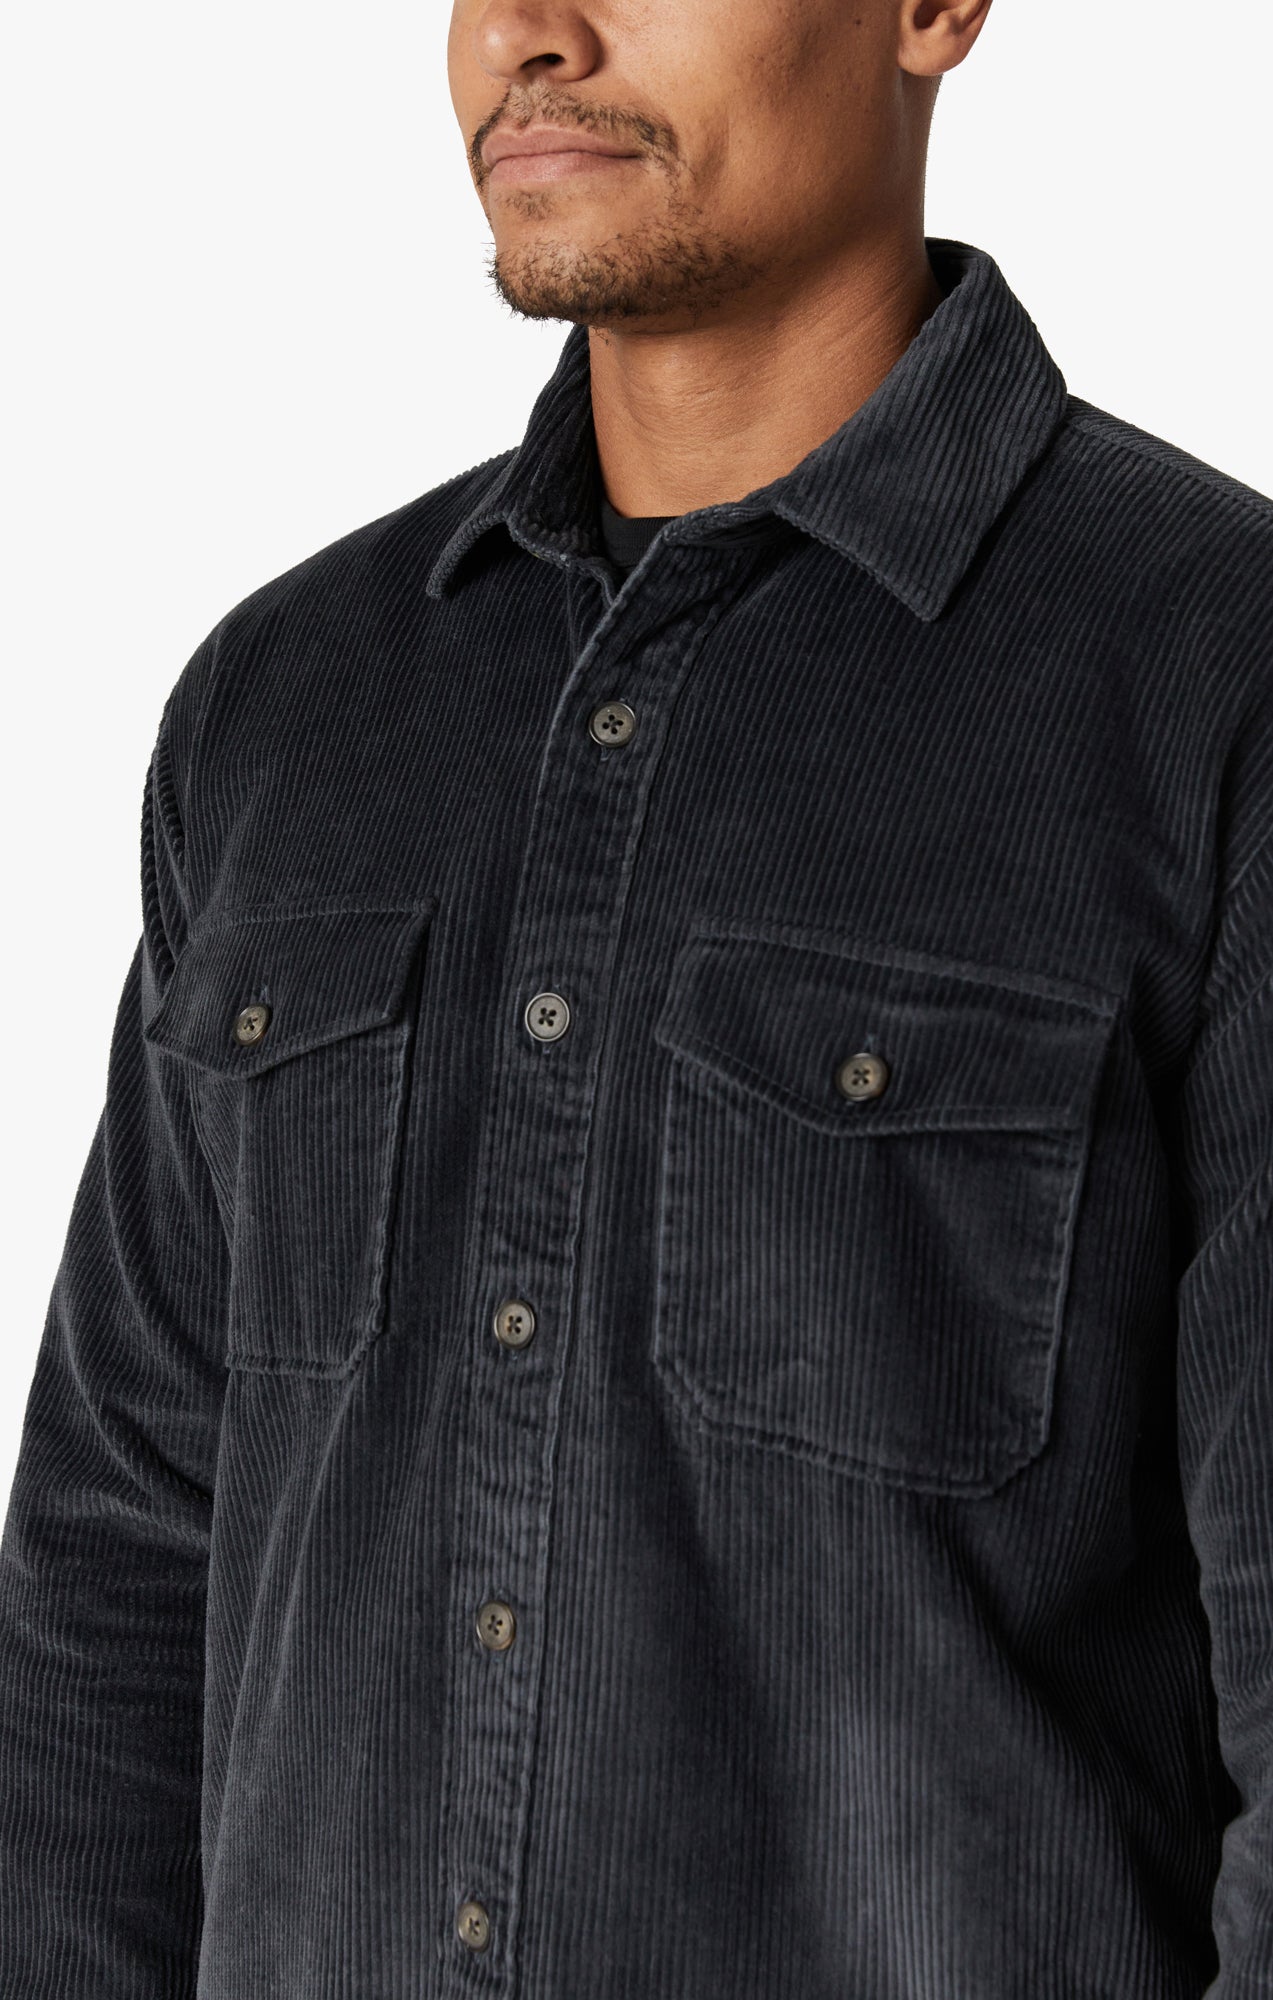 Overshirt In Charcoal Image 5